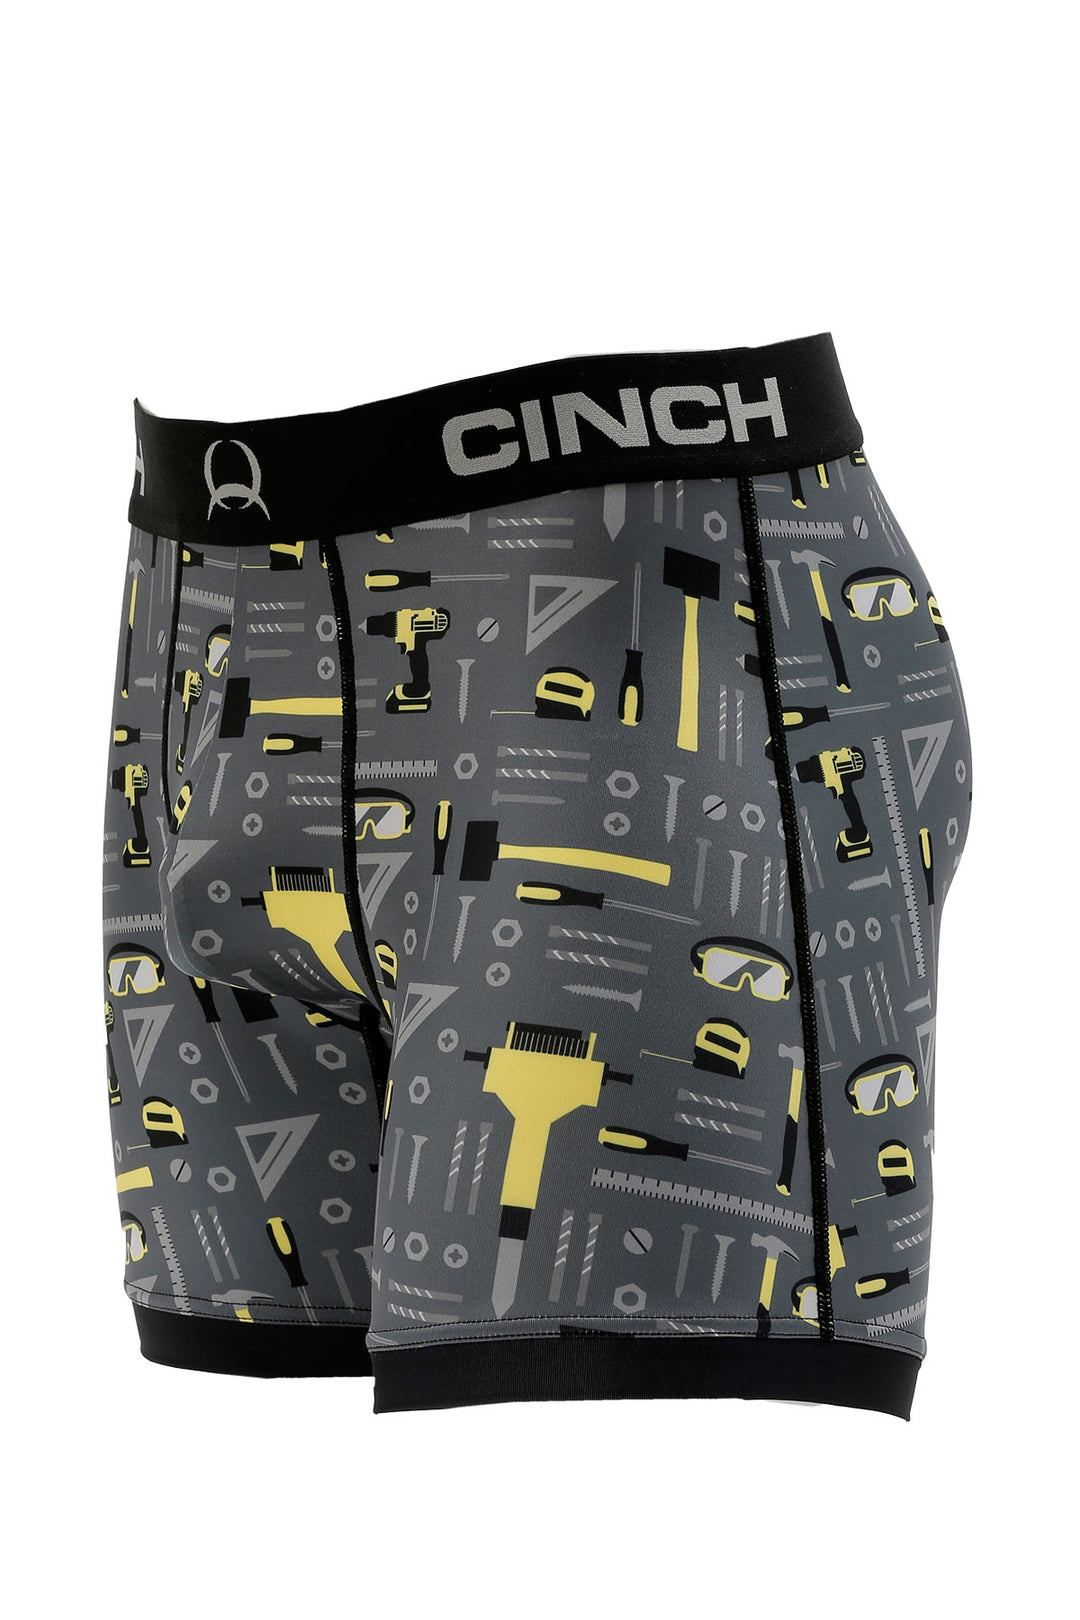 Side view Cinch | 6" Boxer Brief |Tools